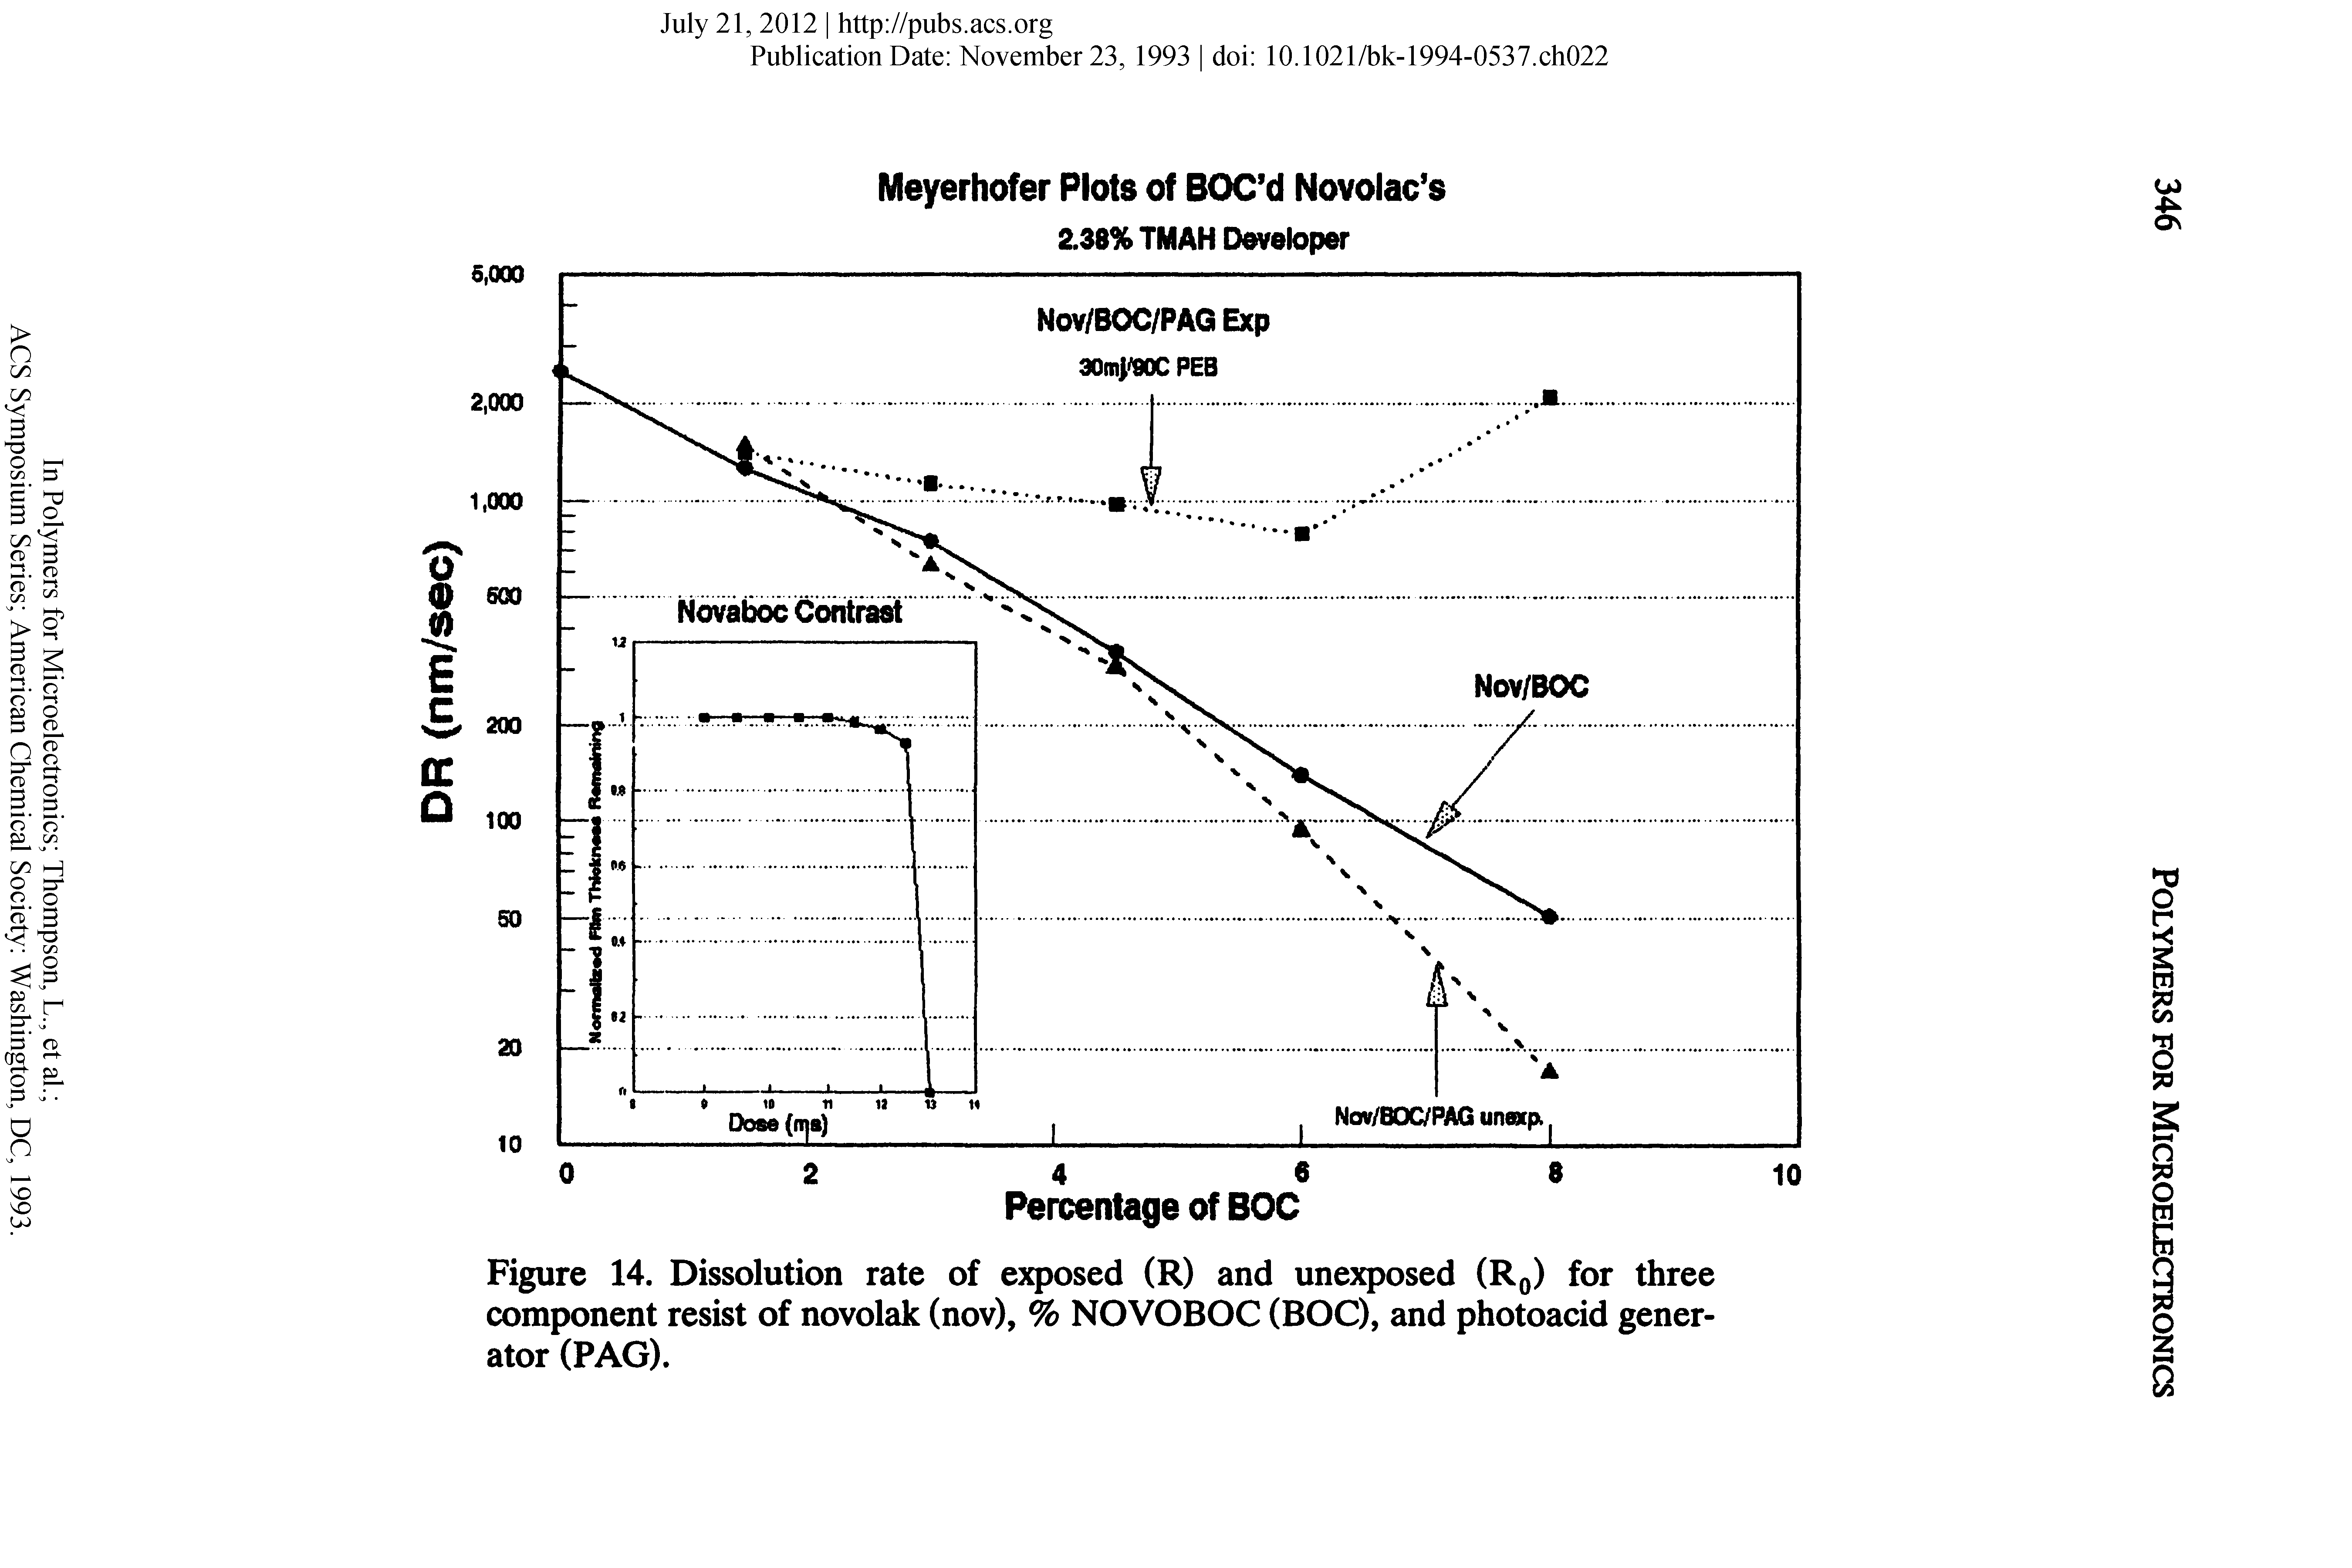 Figure 14. Dissolution rate of exposed (R) and unexposed (Rq) for three component resist of novolak (nov), % NOVOBOC (BOC), and photoacid generator (PAG).